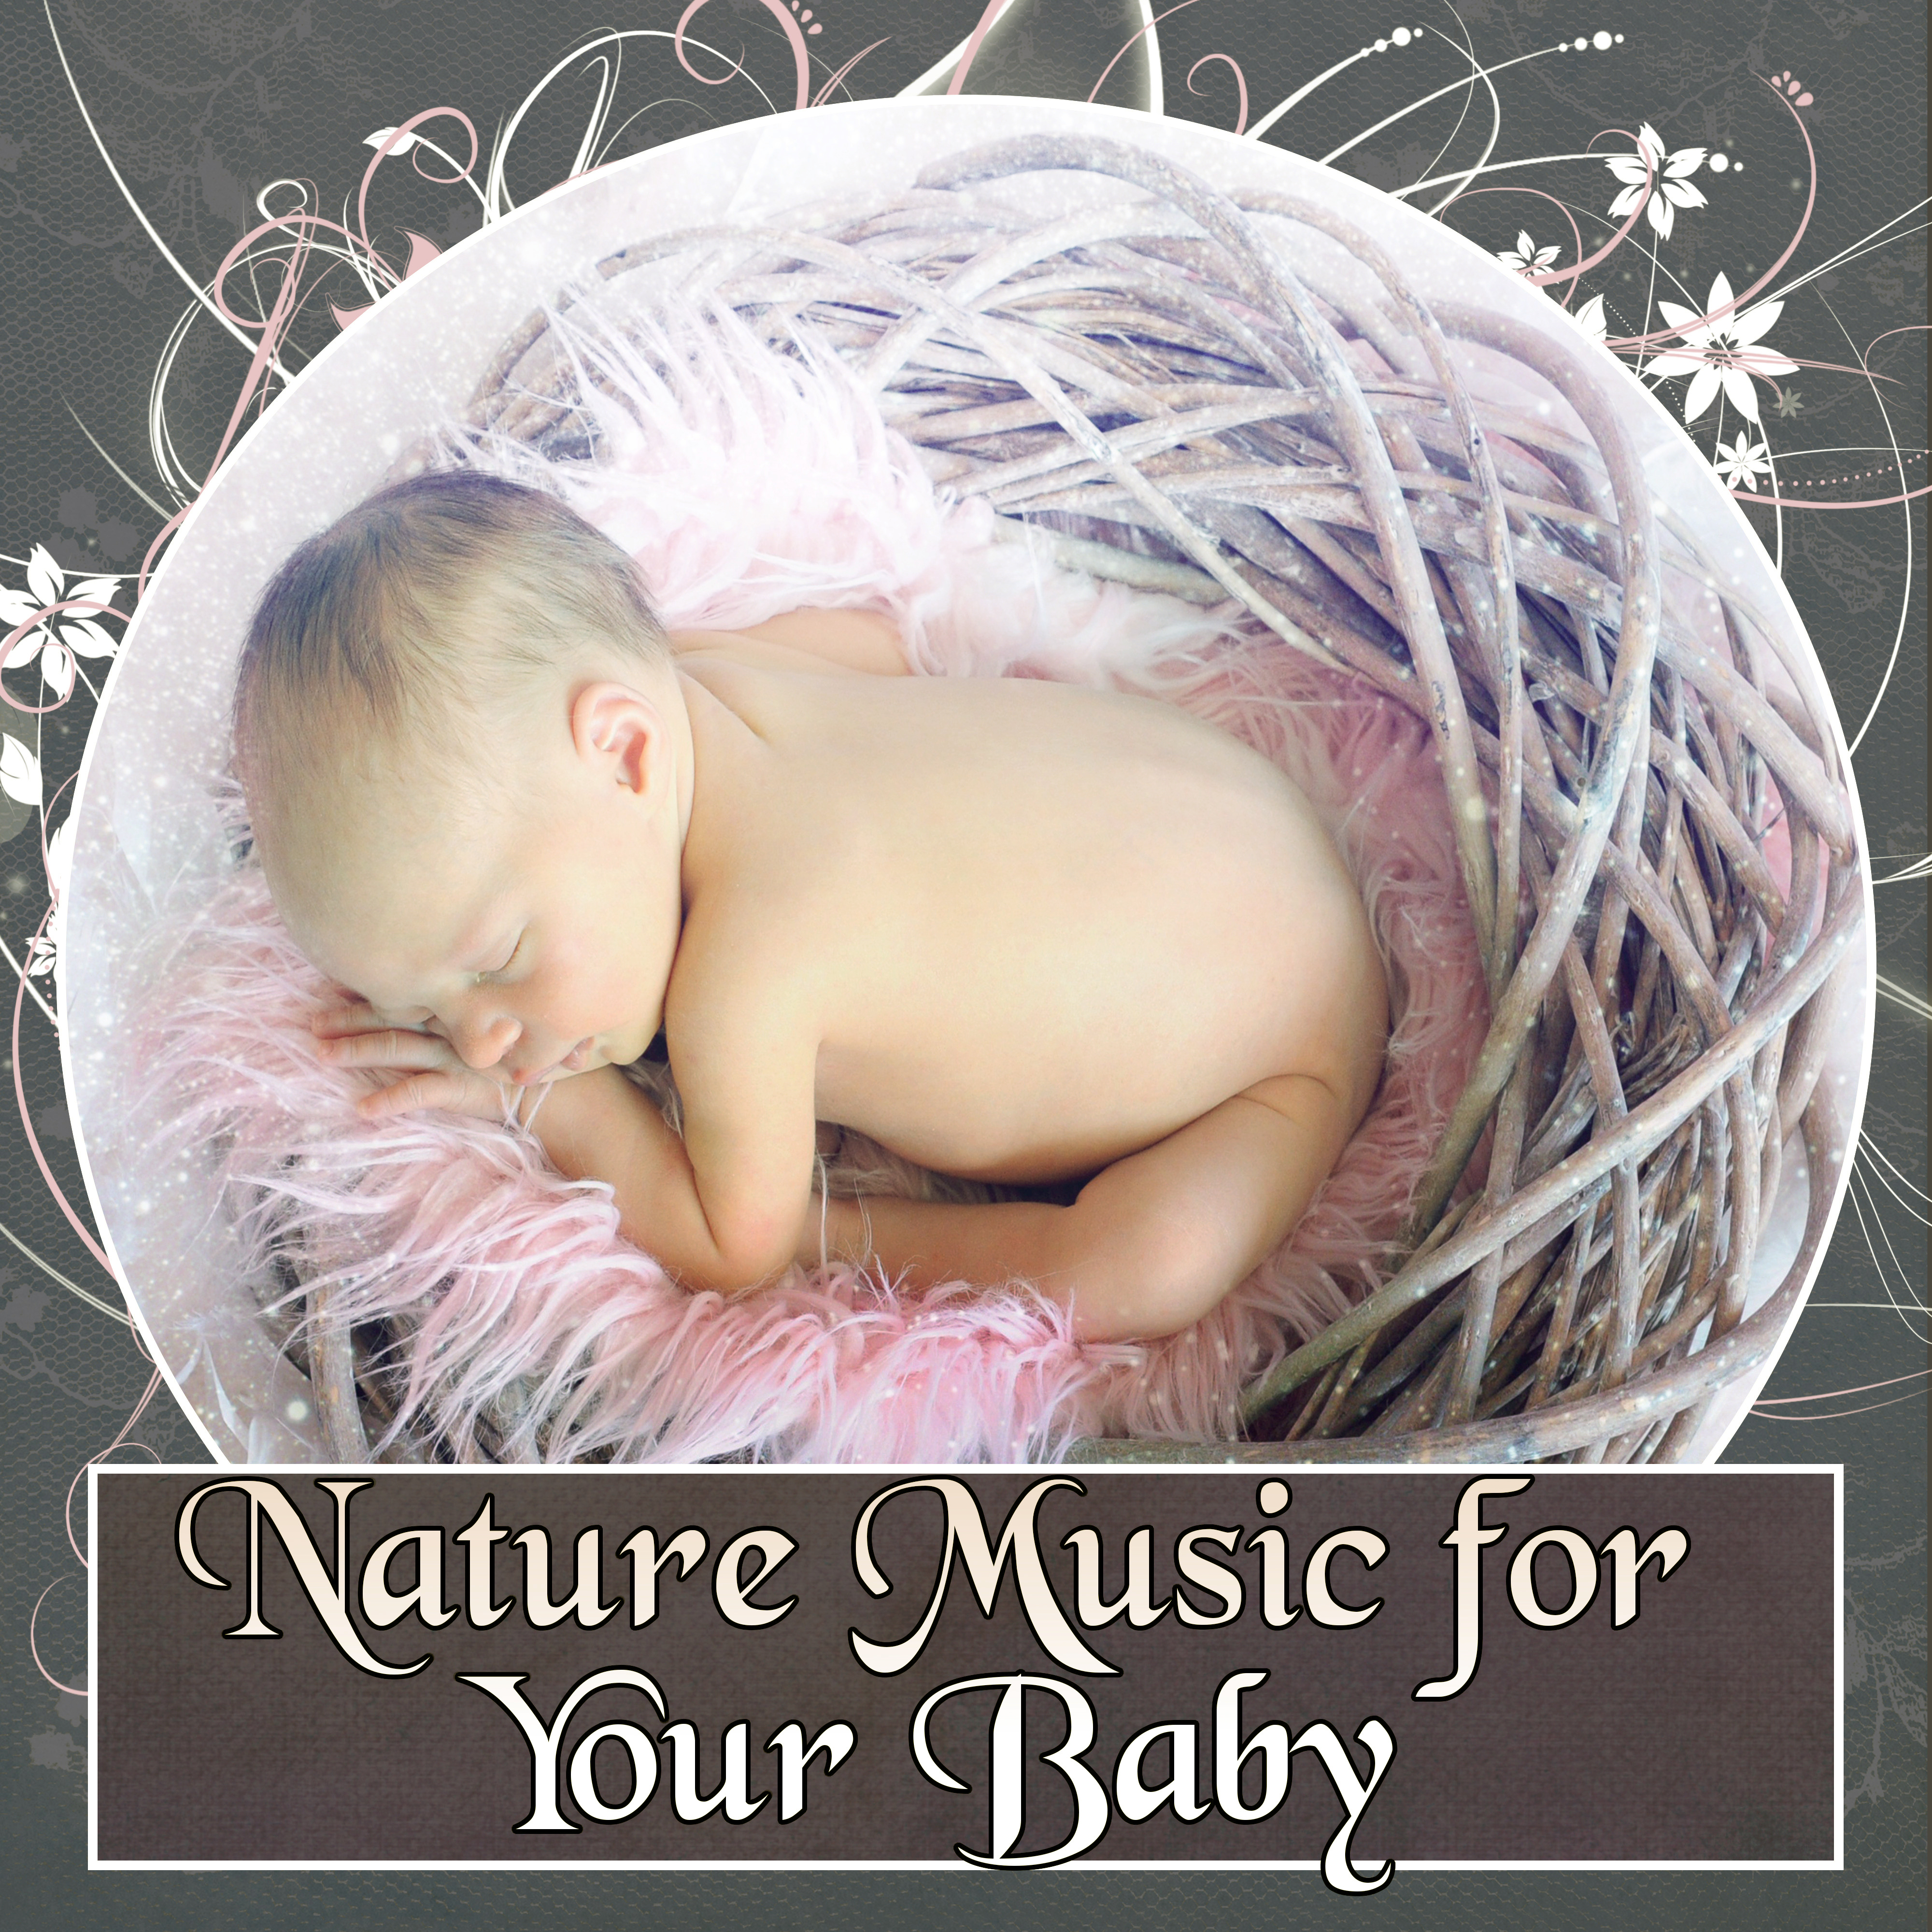 Nature Music for Your Baby - Relax, Fall Asleep and Sleep Through the Night, Baby Lullabies, Cradle Song, Calm Night, Sweet Dream, Music for Baby